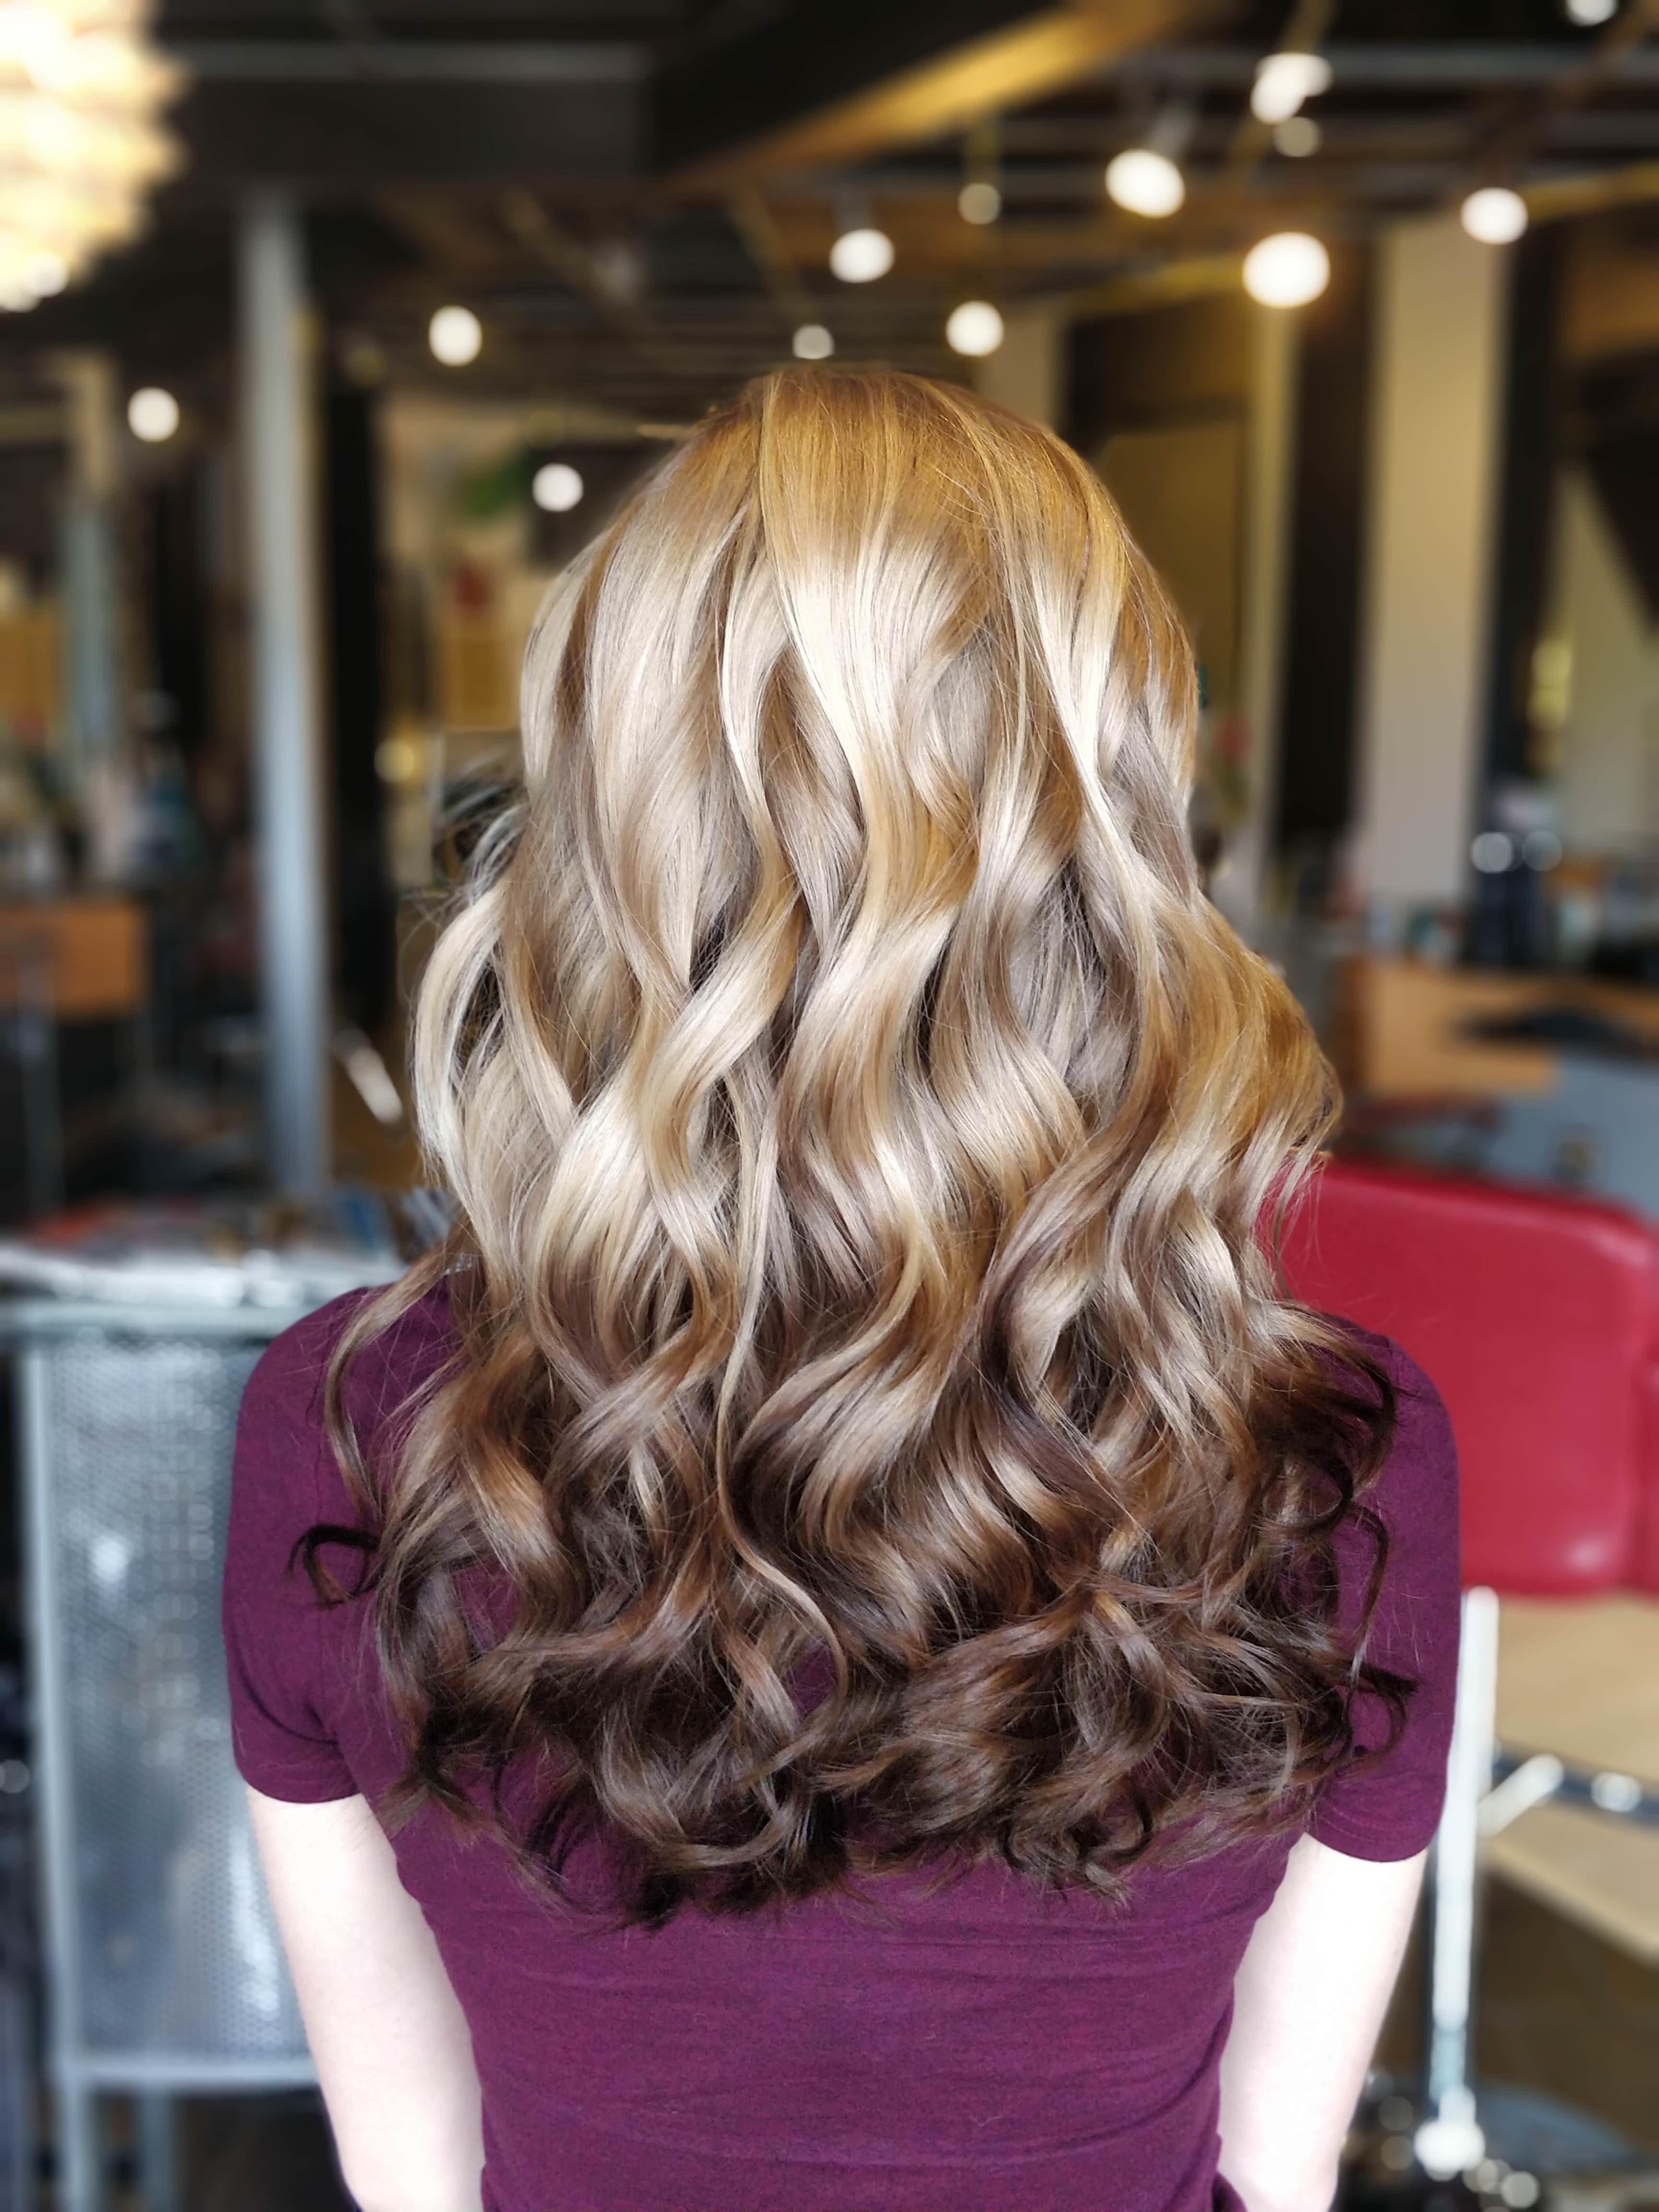 Reverse Brunette Balayage Hair Color Technique – Reverse Balayage Regarding Most Recently Released Balayage Blonde Hairstyles With Layered Ends (View 12 of 20)